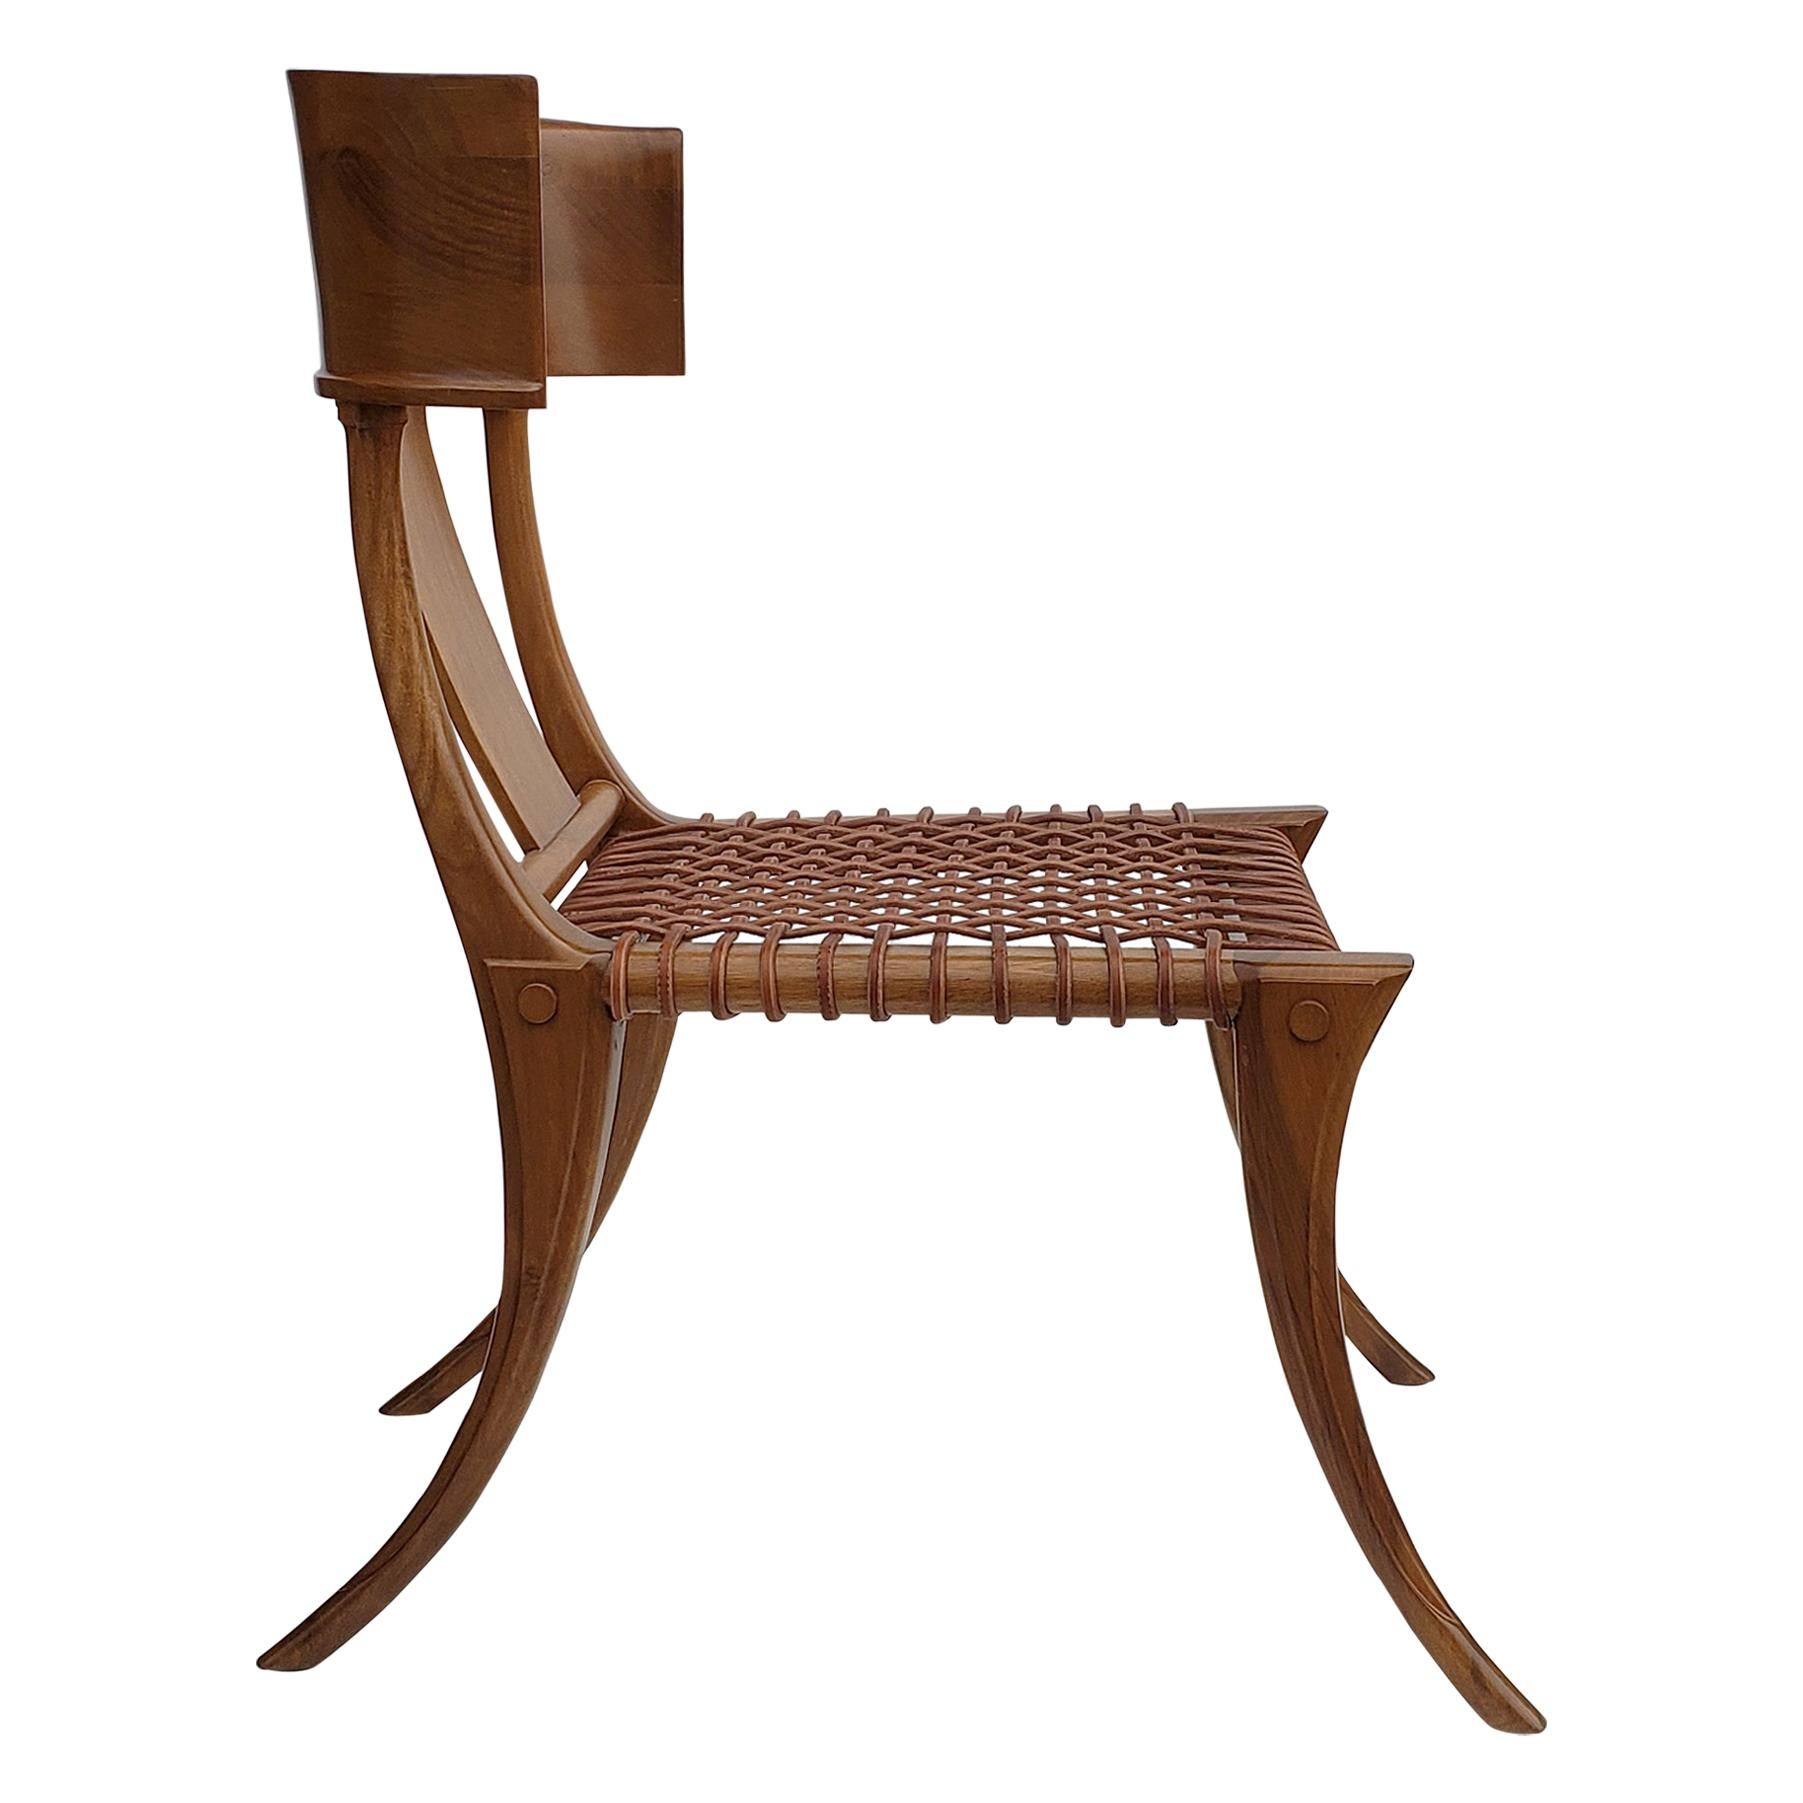 T.H. Robsjohn-Gibbings Klismos Chair for Saridis of Athens in Walnut and Leather